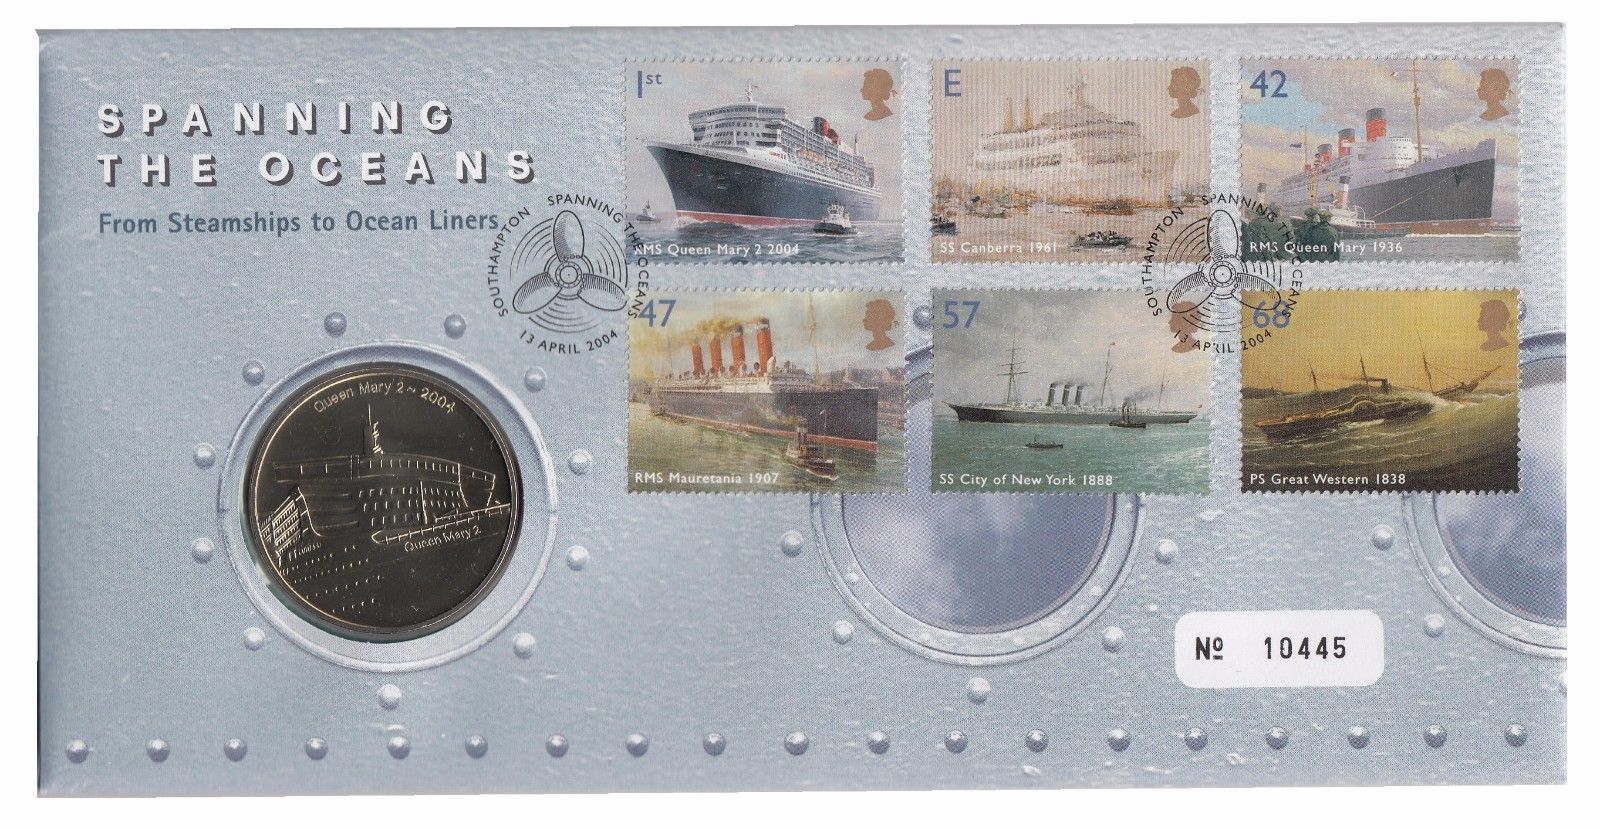 2004 Spanning the Oceans Commemorative Coin Cover and Medallion